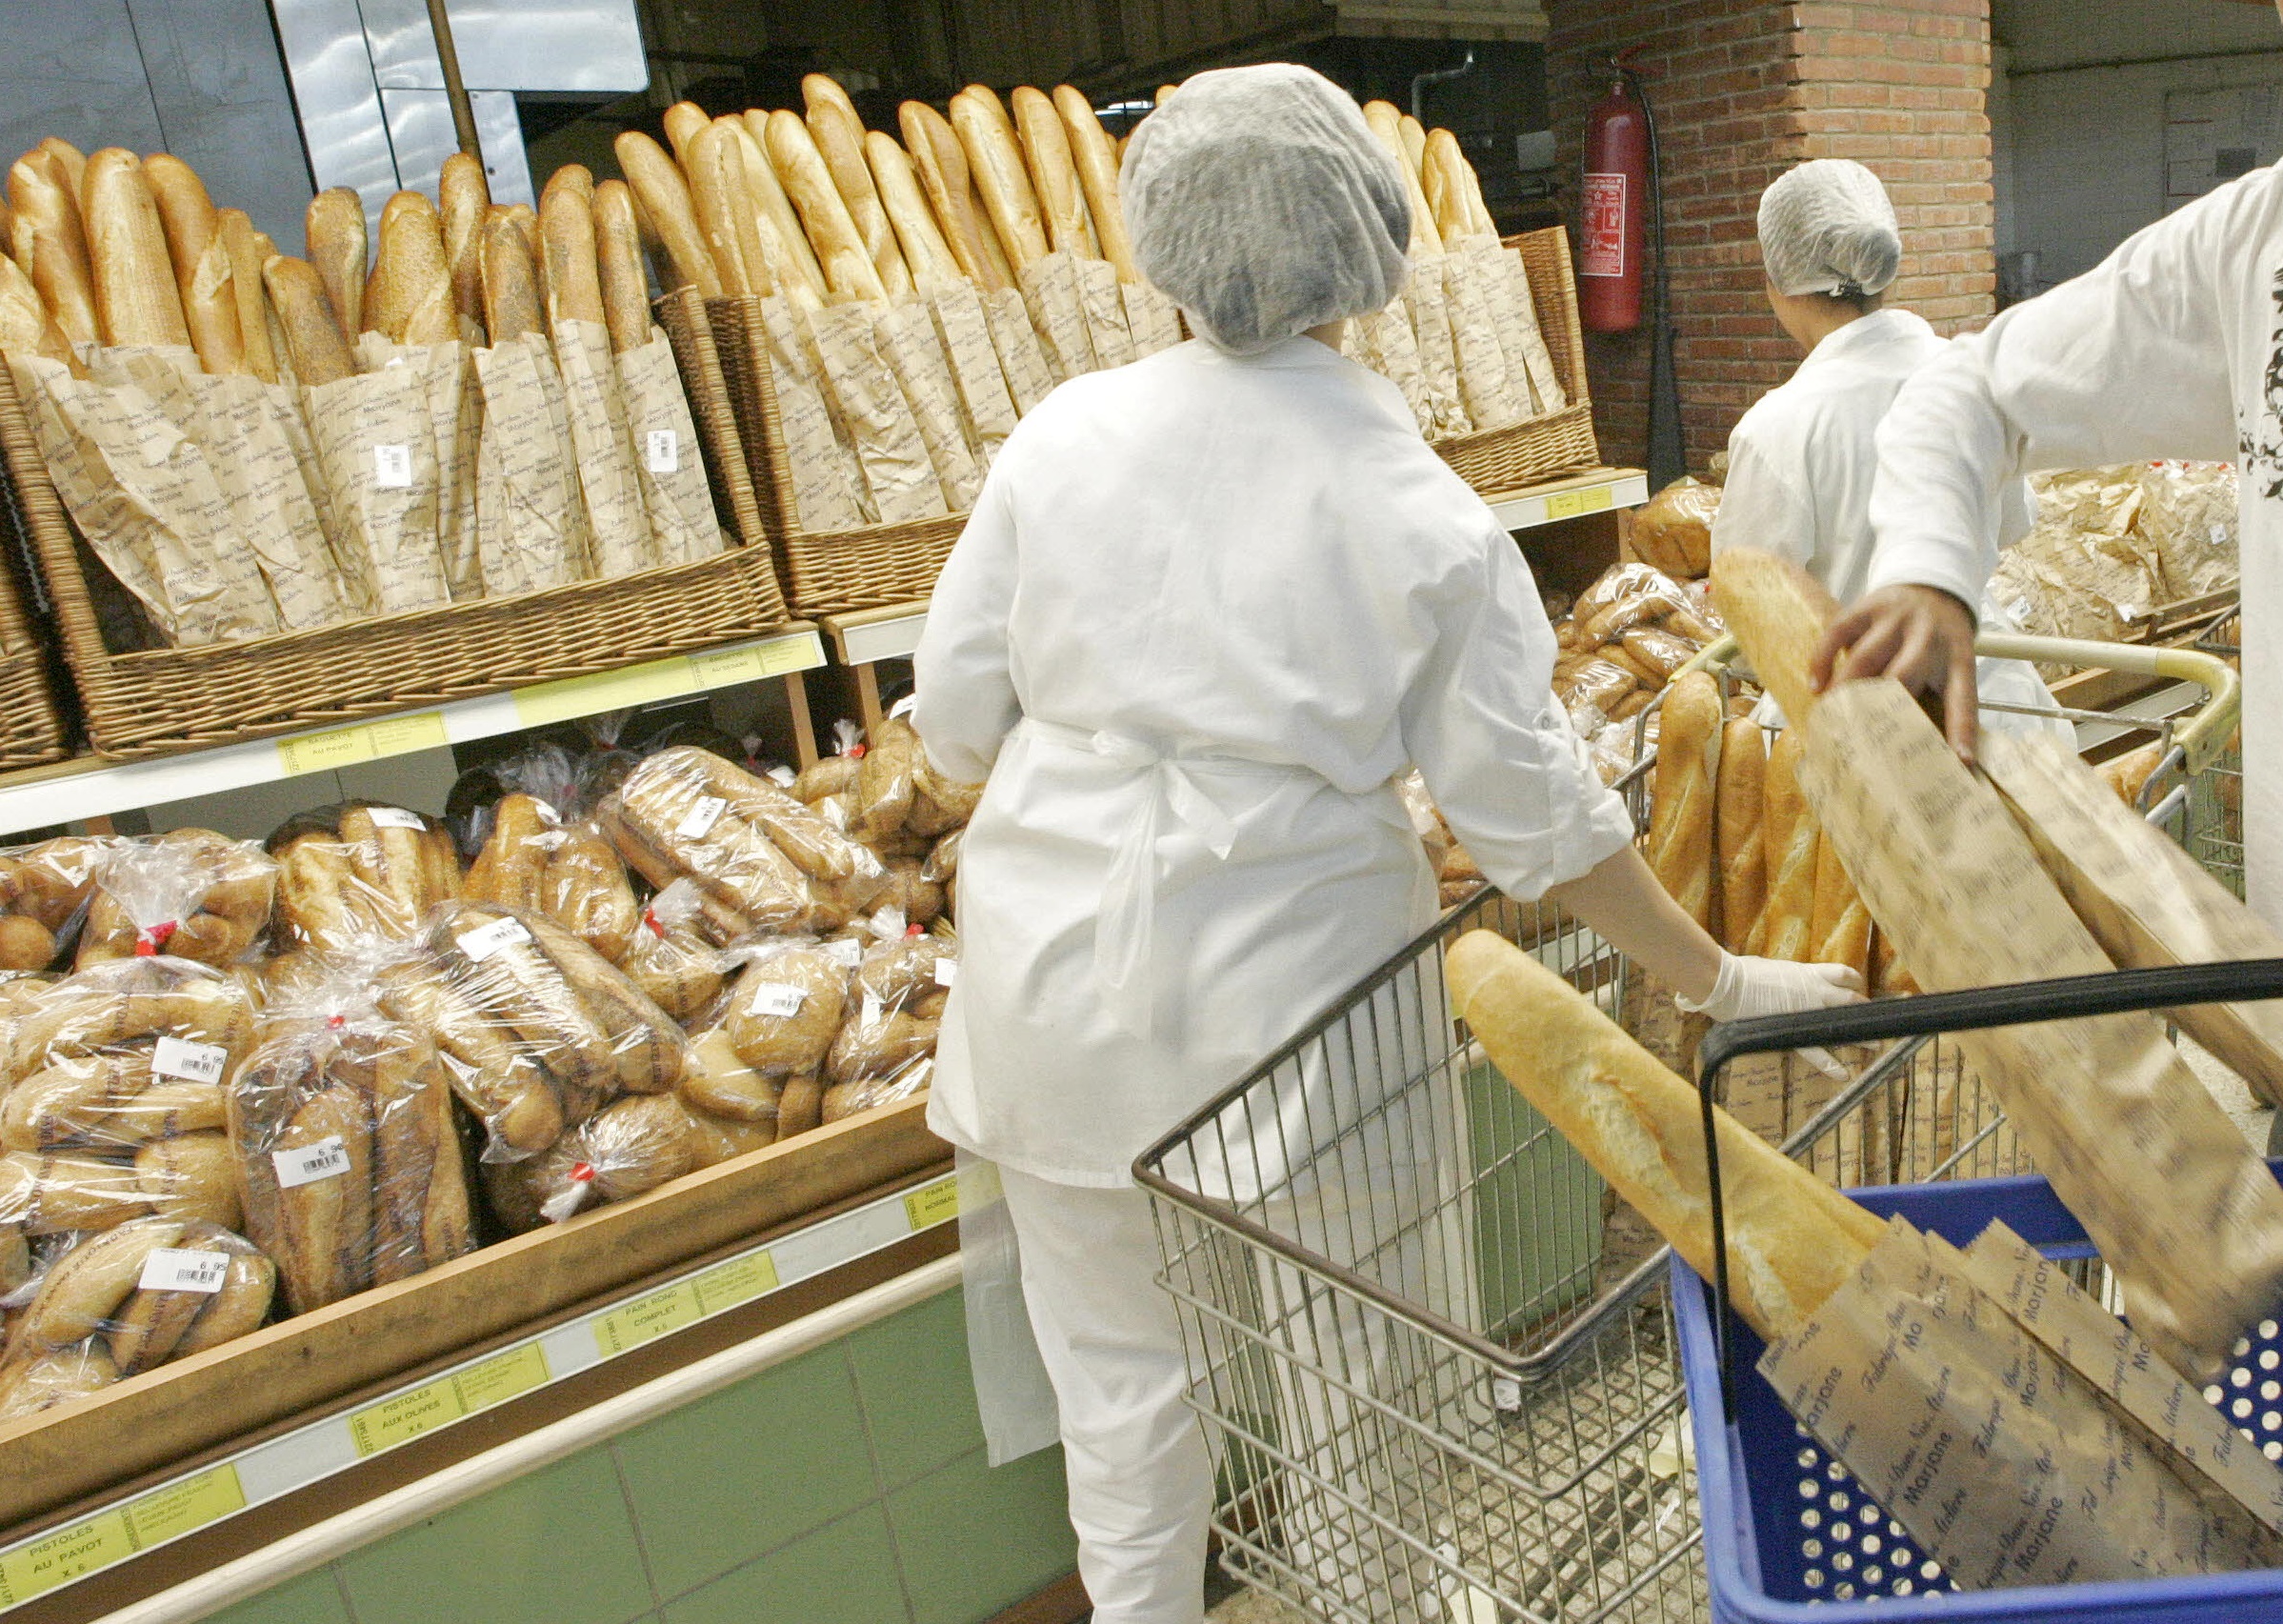 A Moroccan buys bread at a supermarket on April 4, 2008 in Rabat. During the first two months of 2008 prices in Morocco have risen, cooking oil by 8%, semolina for couscous by 12.1%, pasta by 8.7%, soft flour by 6.7%, hard flour by 17.3% and 14% for corn according to the Moroccan census bureau (HCP). In Egypt, there is a serious bread crisis brought on by a combination of the rising cost of wheat on world markets and sky-rocketing inflation, and the price of bread has increased fivefold in private bakeries. EU Development Commissioner Louis Michel warned on April 8, 2008 that soaring prices of basic foodstuffs in Africa could cause a "humanitarian tsunami". AFP PHOTO/ABDELHAK SENNA